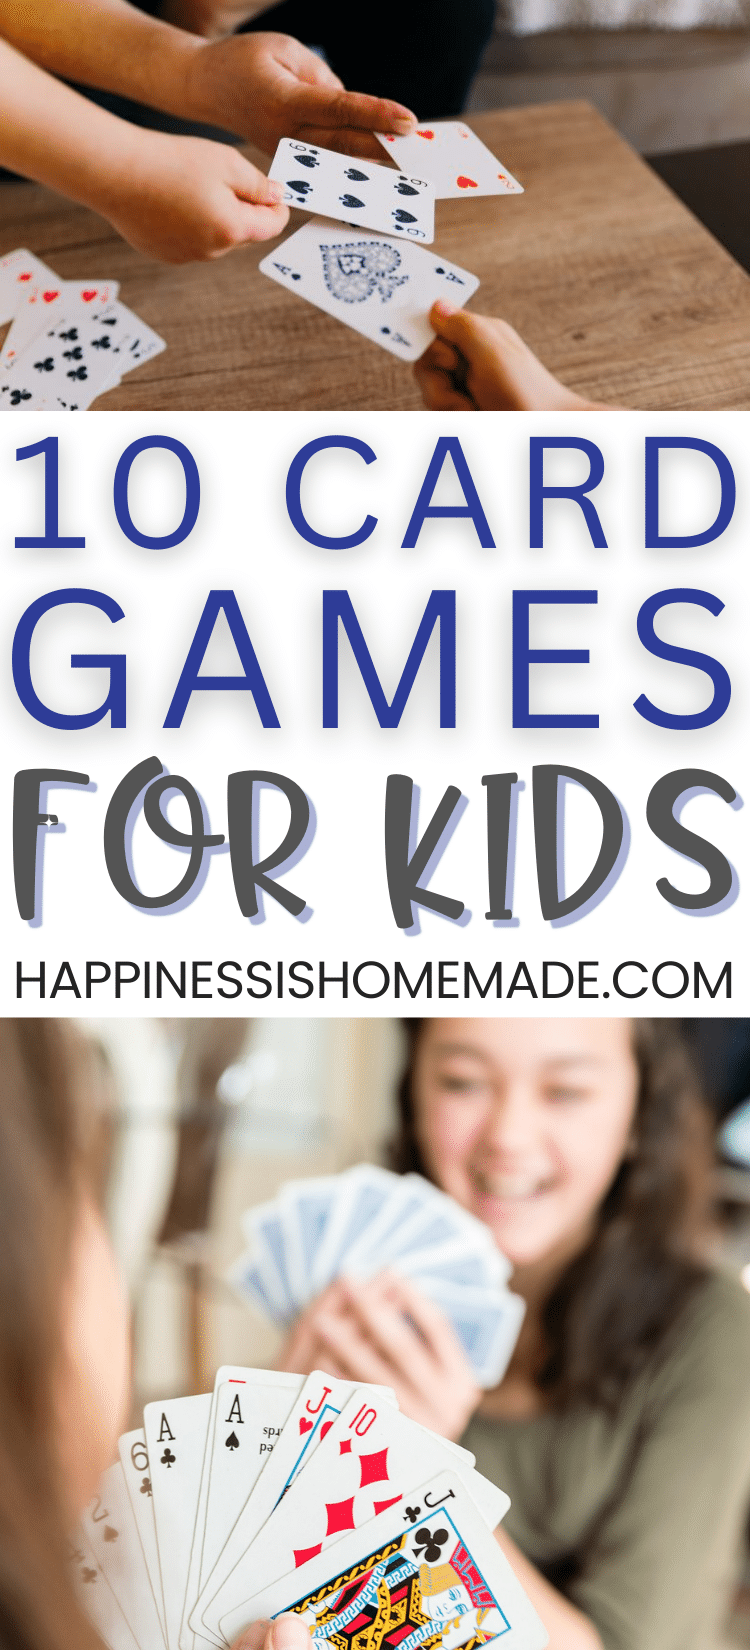 10 Card Games for Kids Pin Graphic